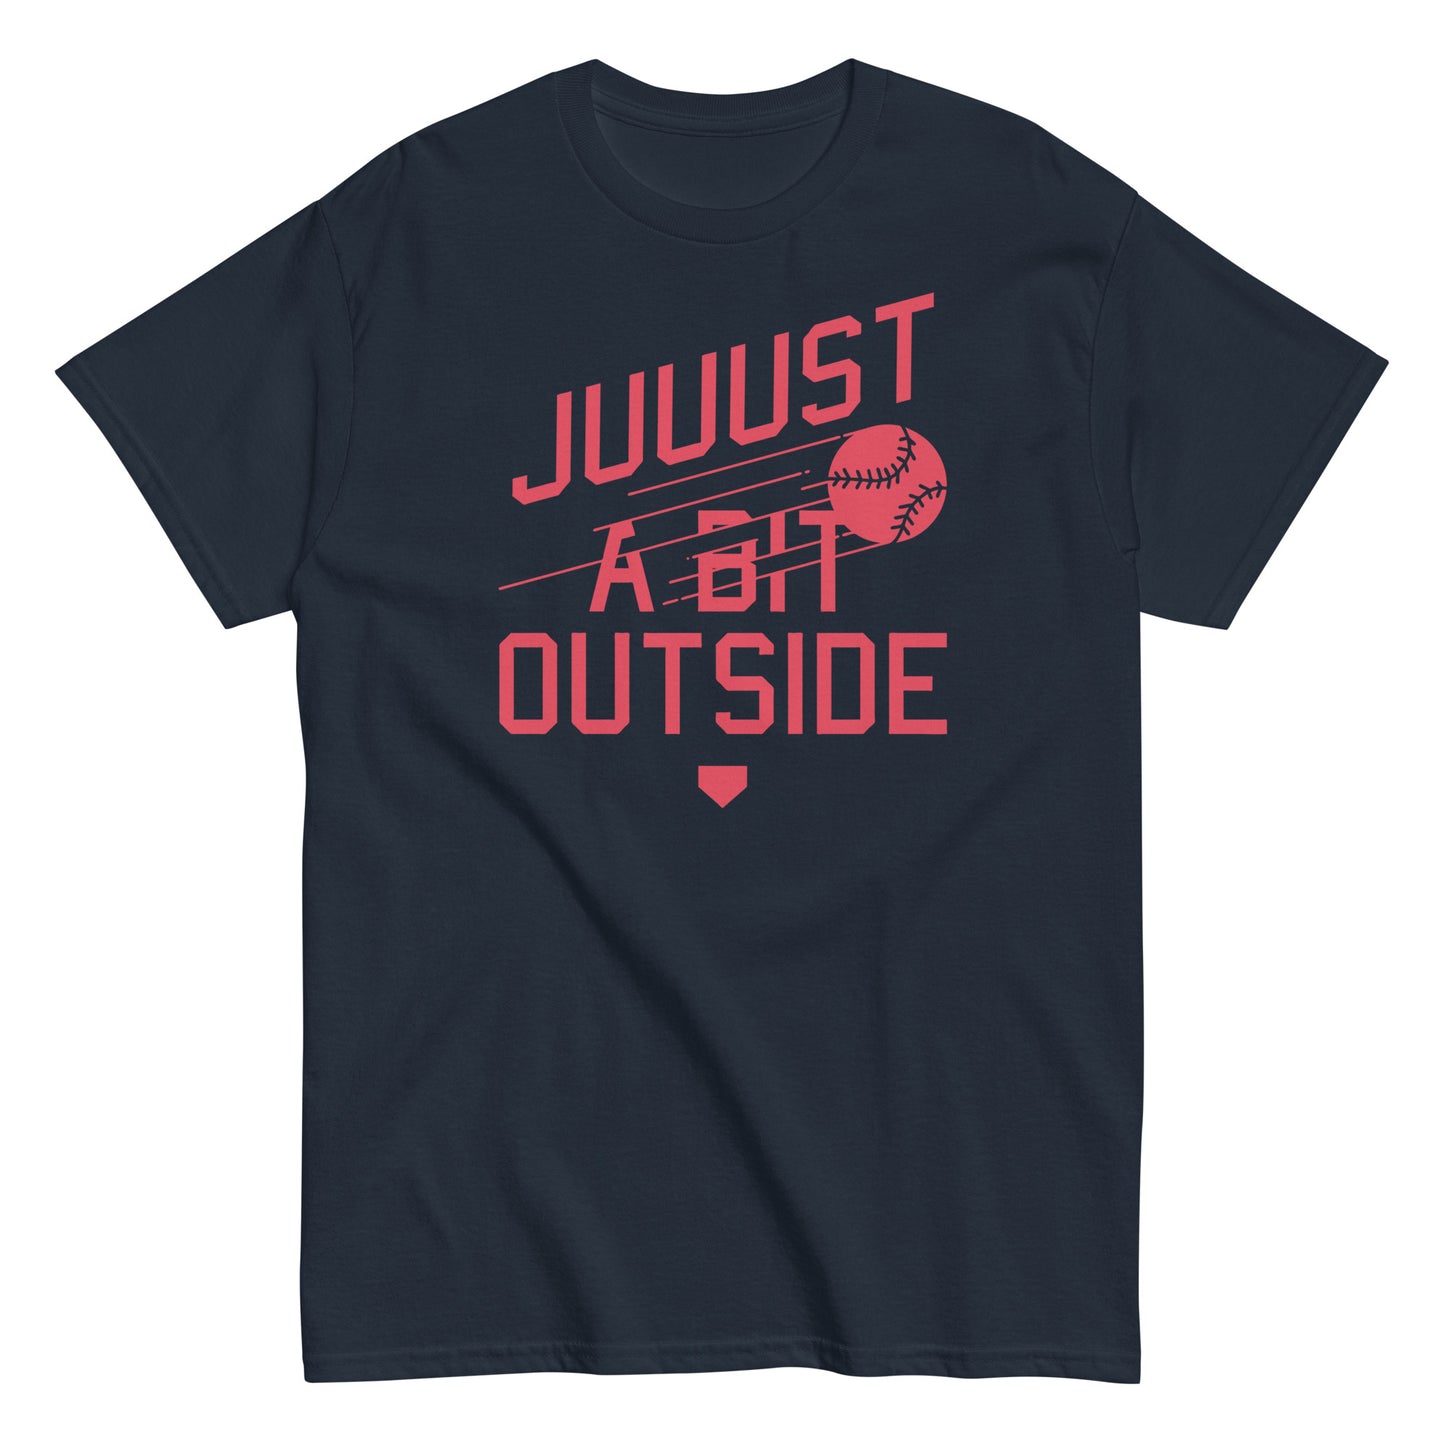 Just A Bit Outside Men's Classic Tee